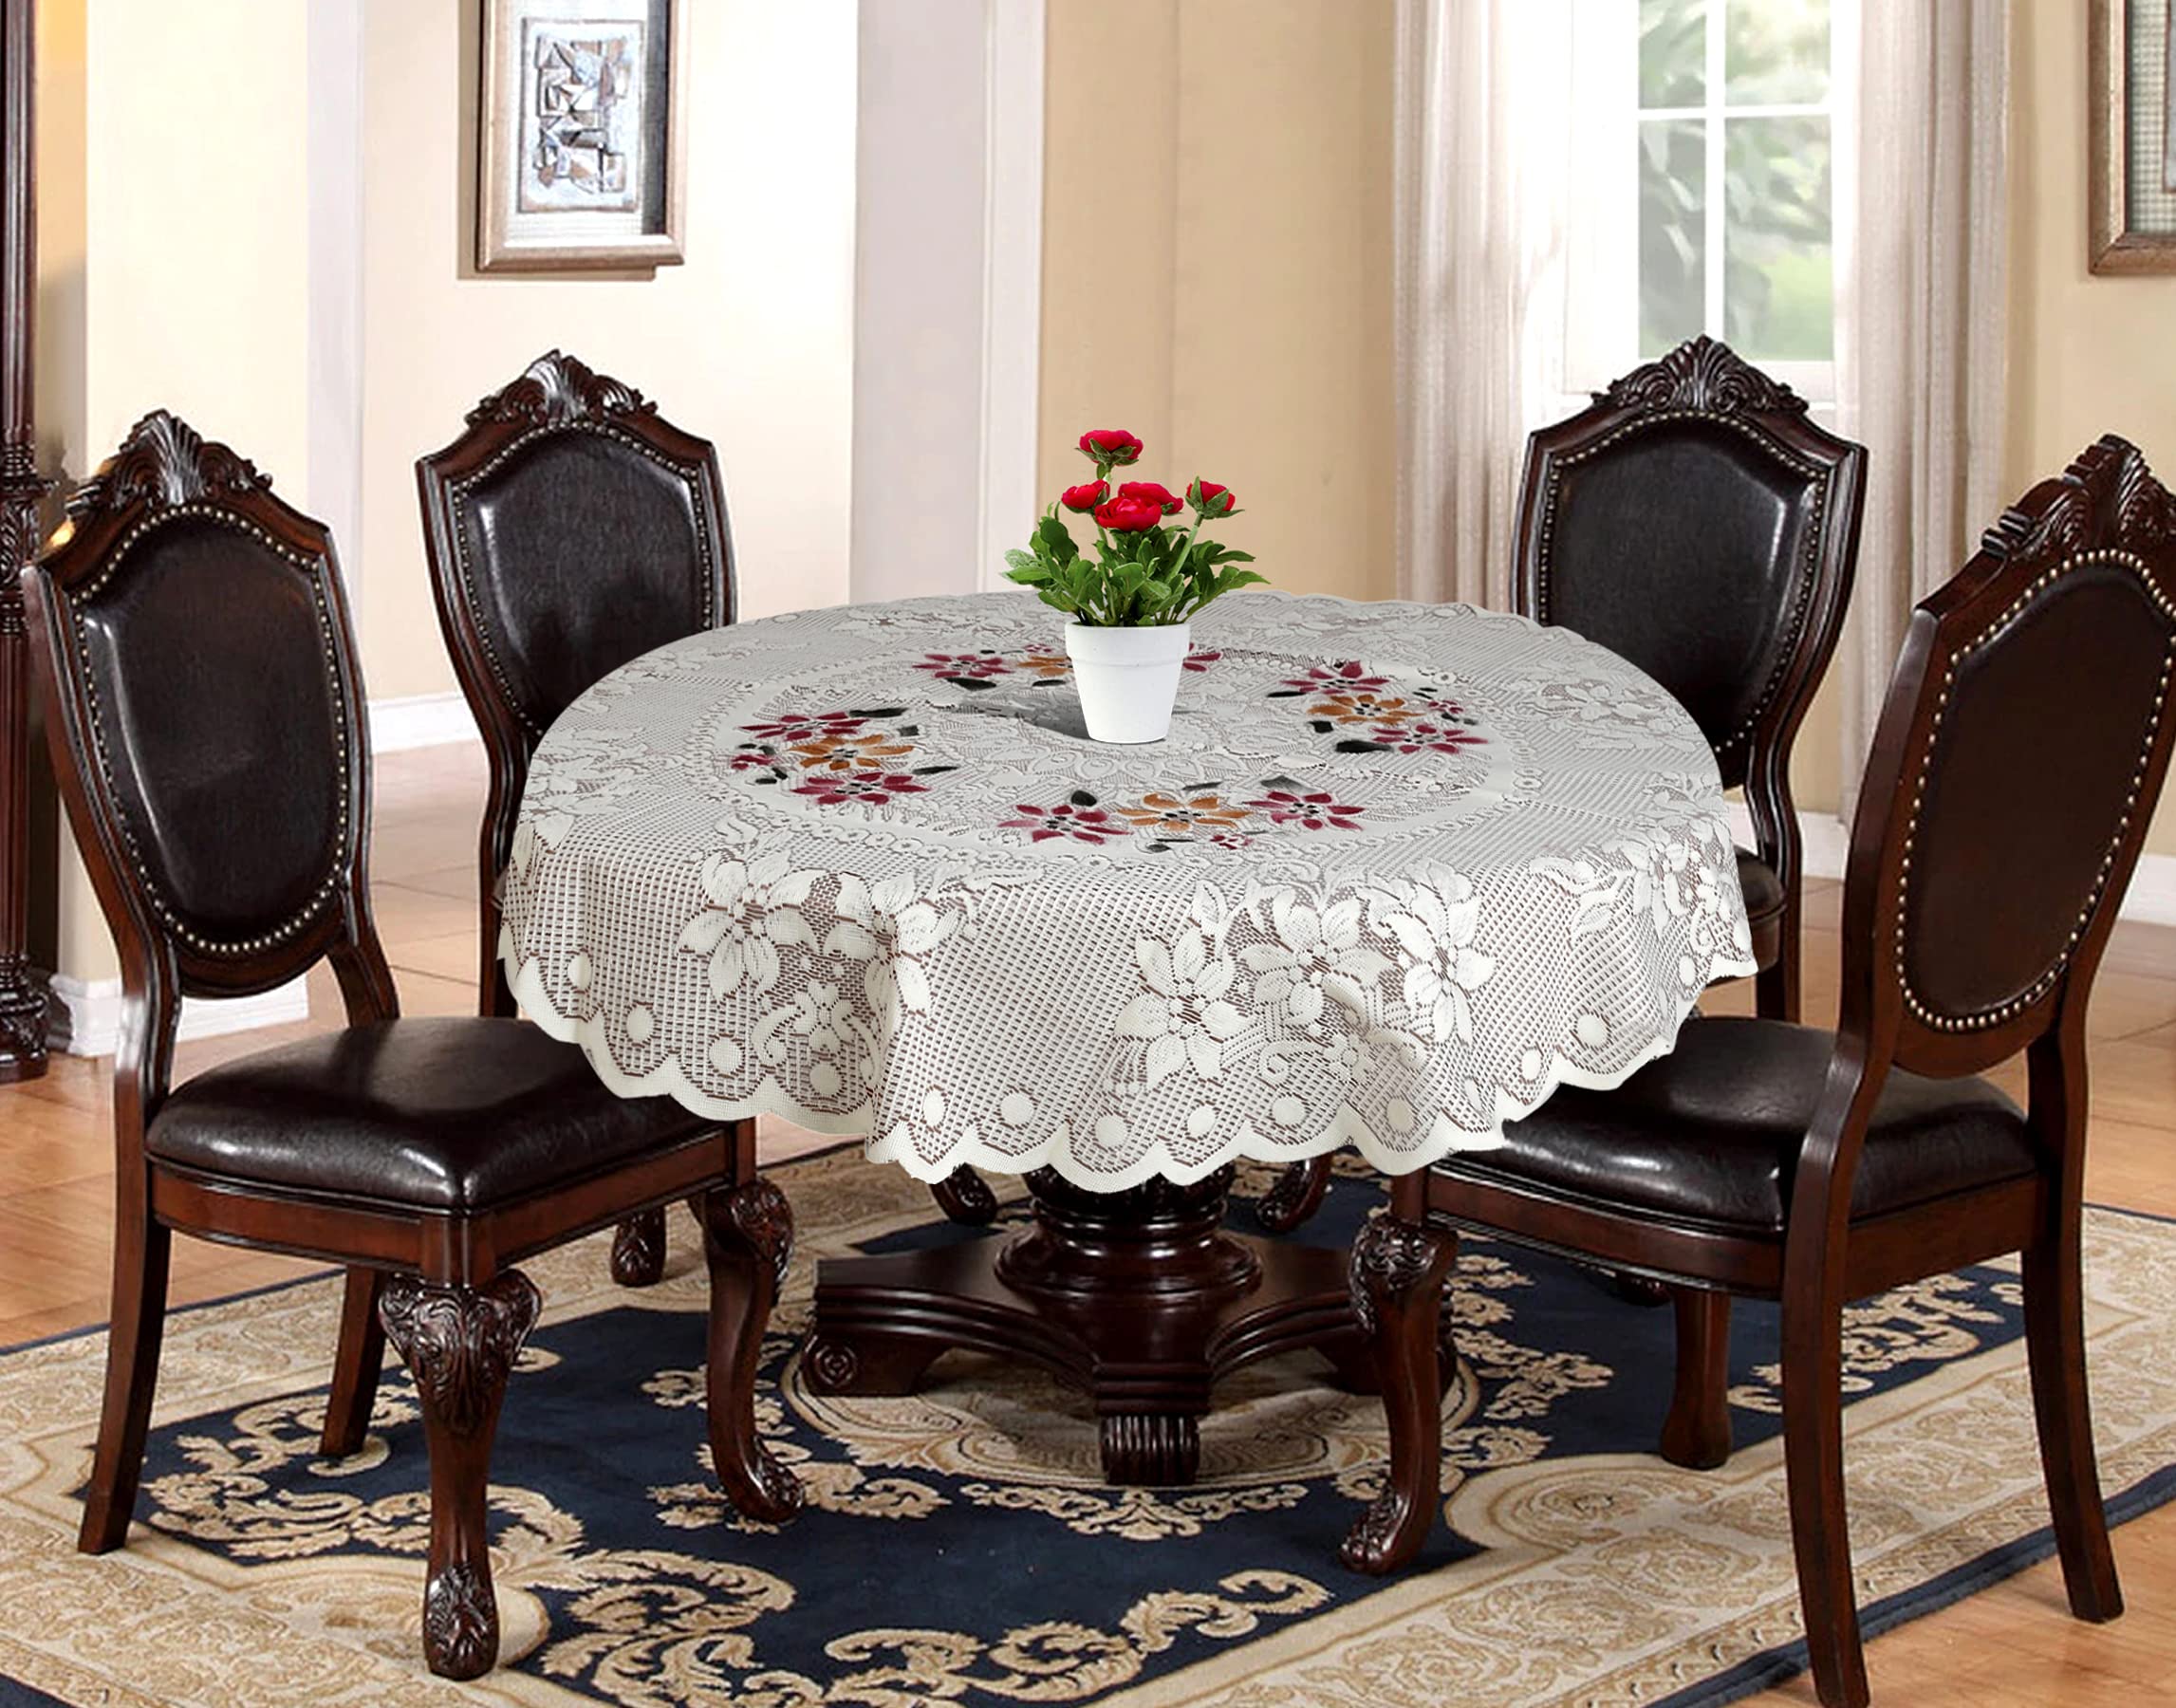 Kuber Industries Cotton Round Table Cover with Flower Design for Parties, Birthdays or Special Holiday Gatherings & Indoor/Outdoor (Brown), (Model: HS_37_KUBMART020507)